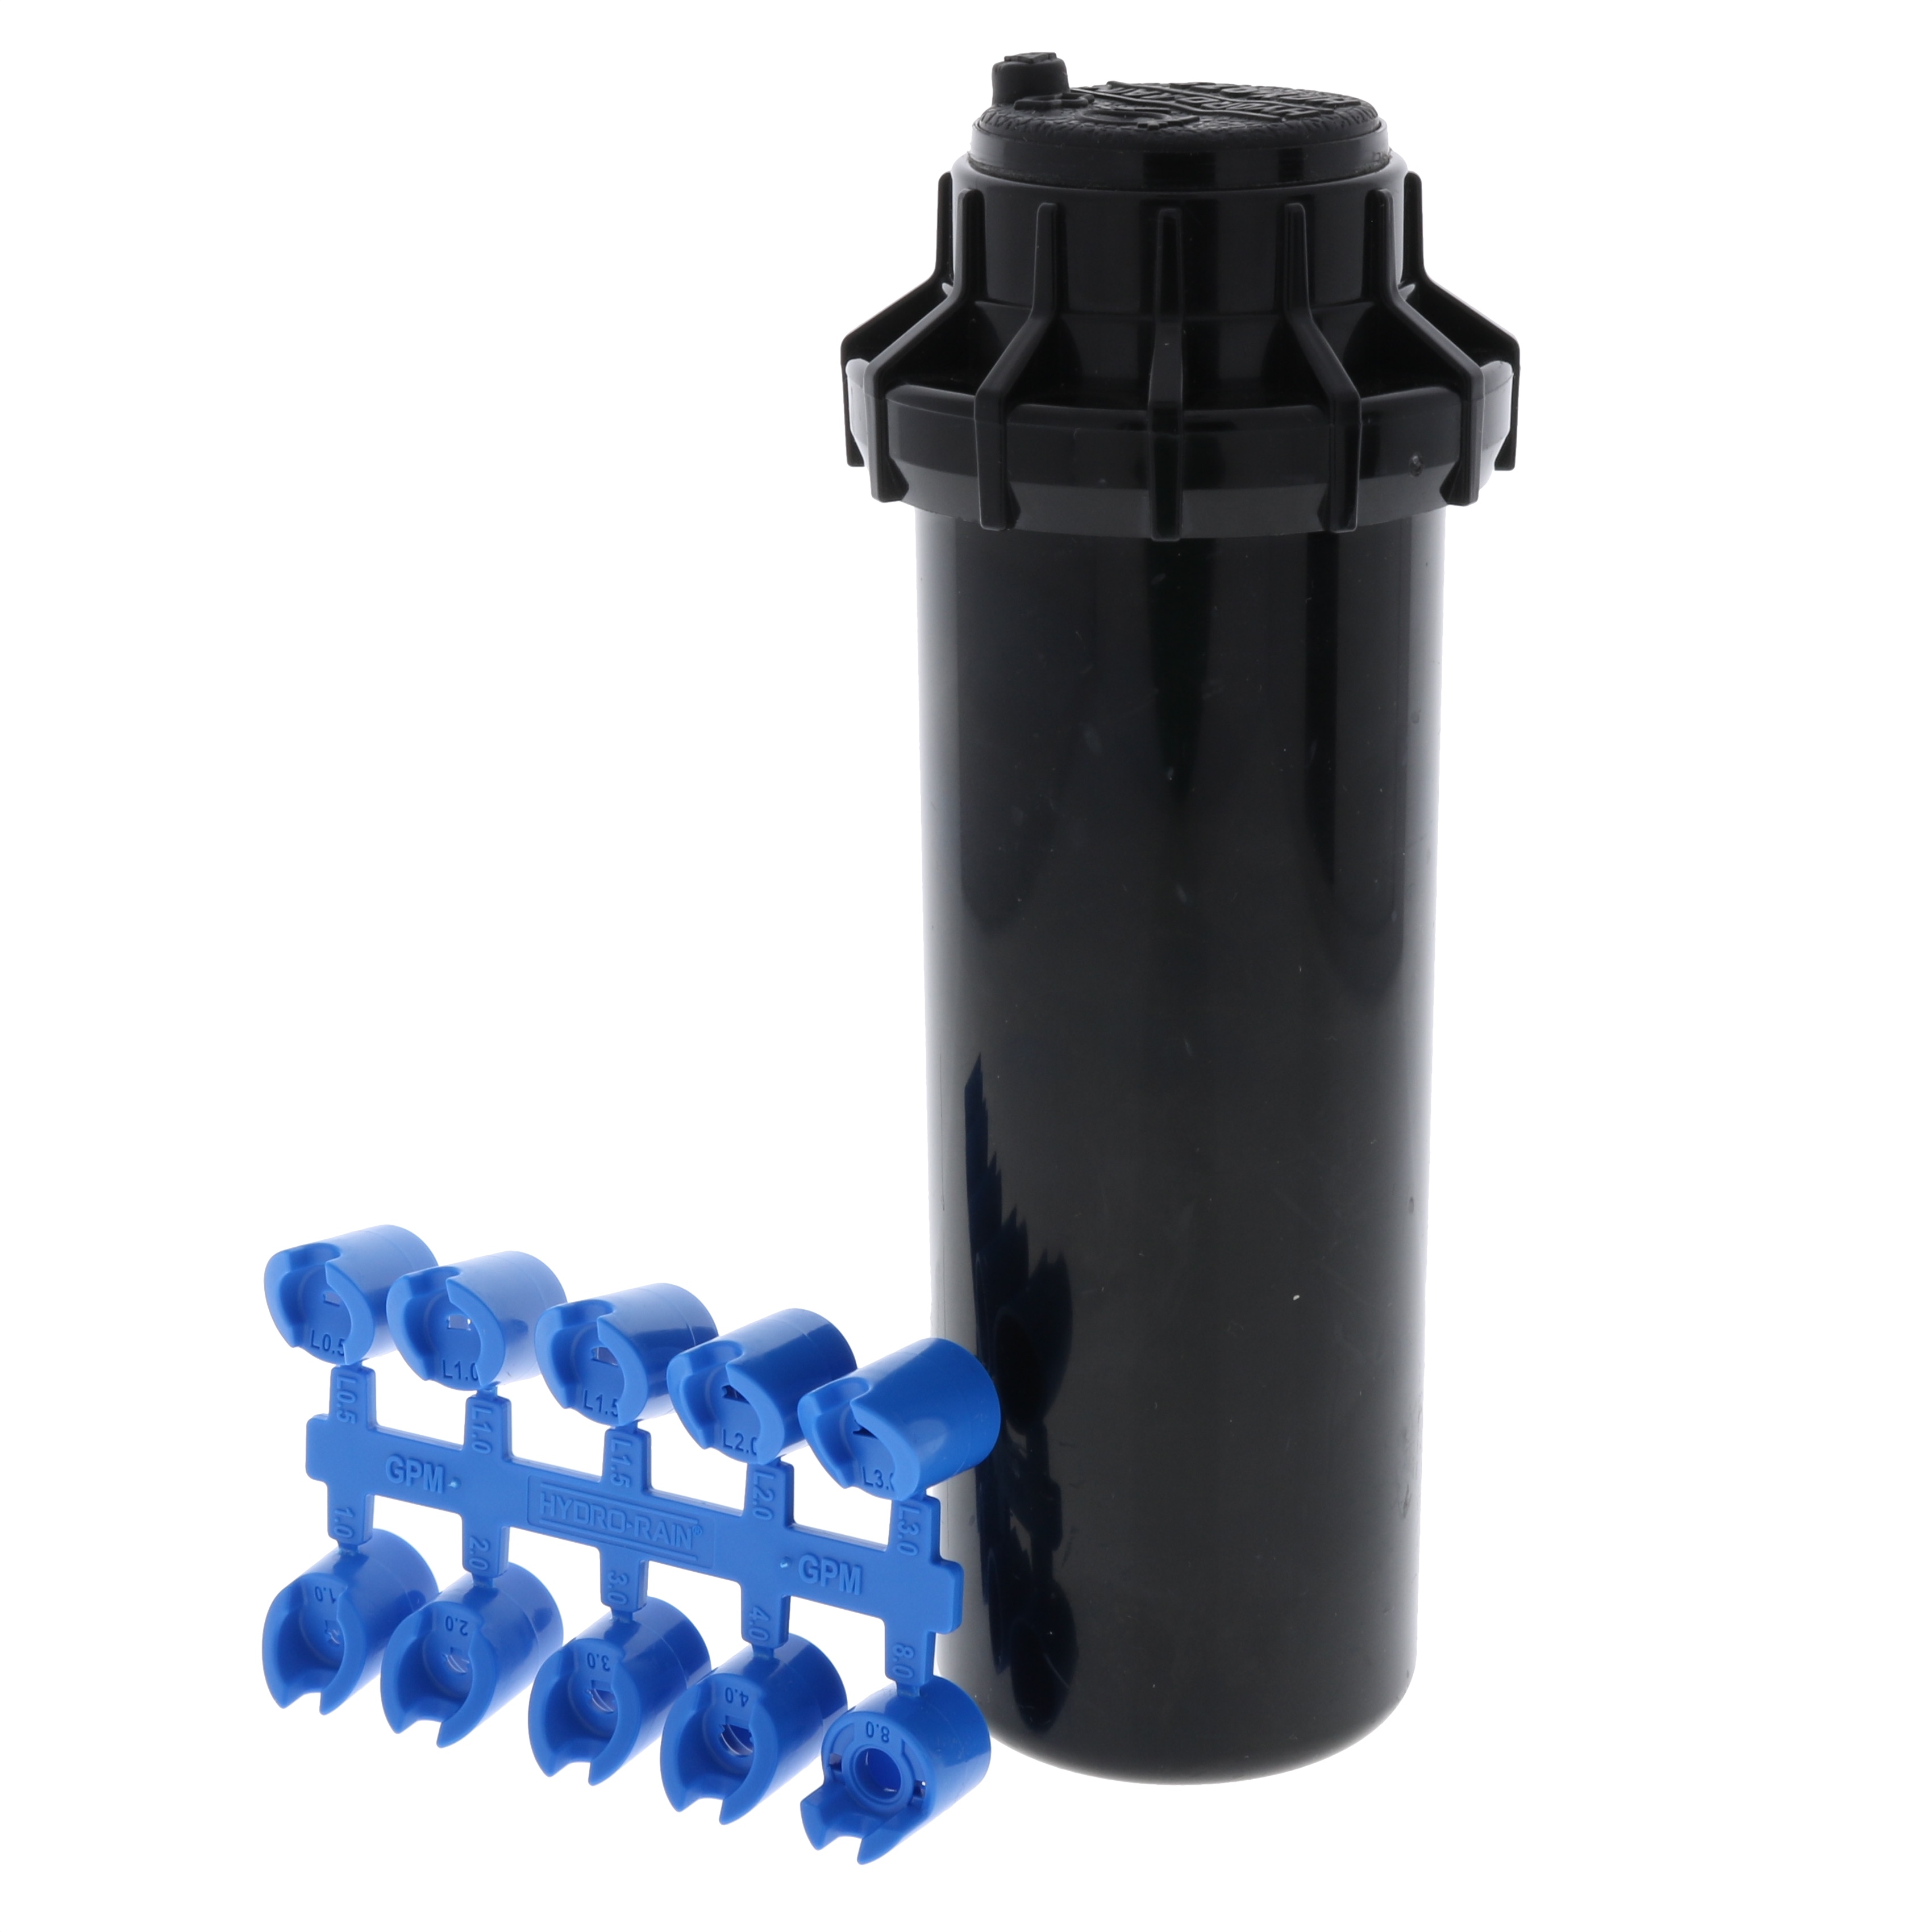 Hydro-Rain HRX 075 Adjustable Rotor w/8 Nozzles-Pop-up Size:4 inch Pop-Up - image 1 of 1